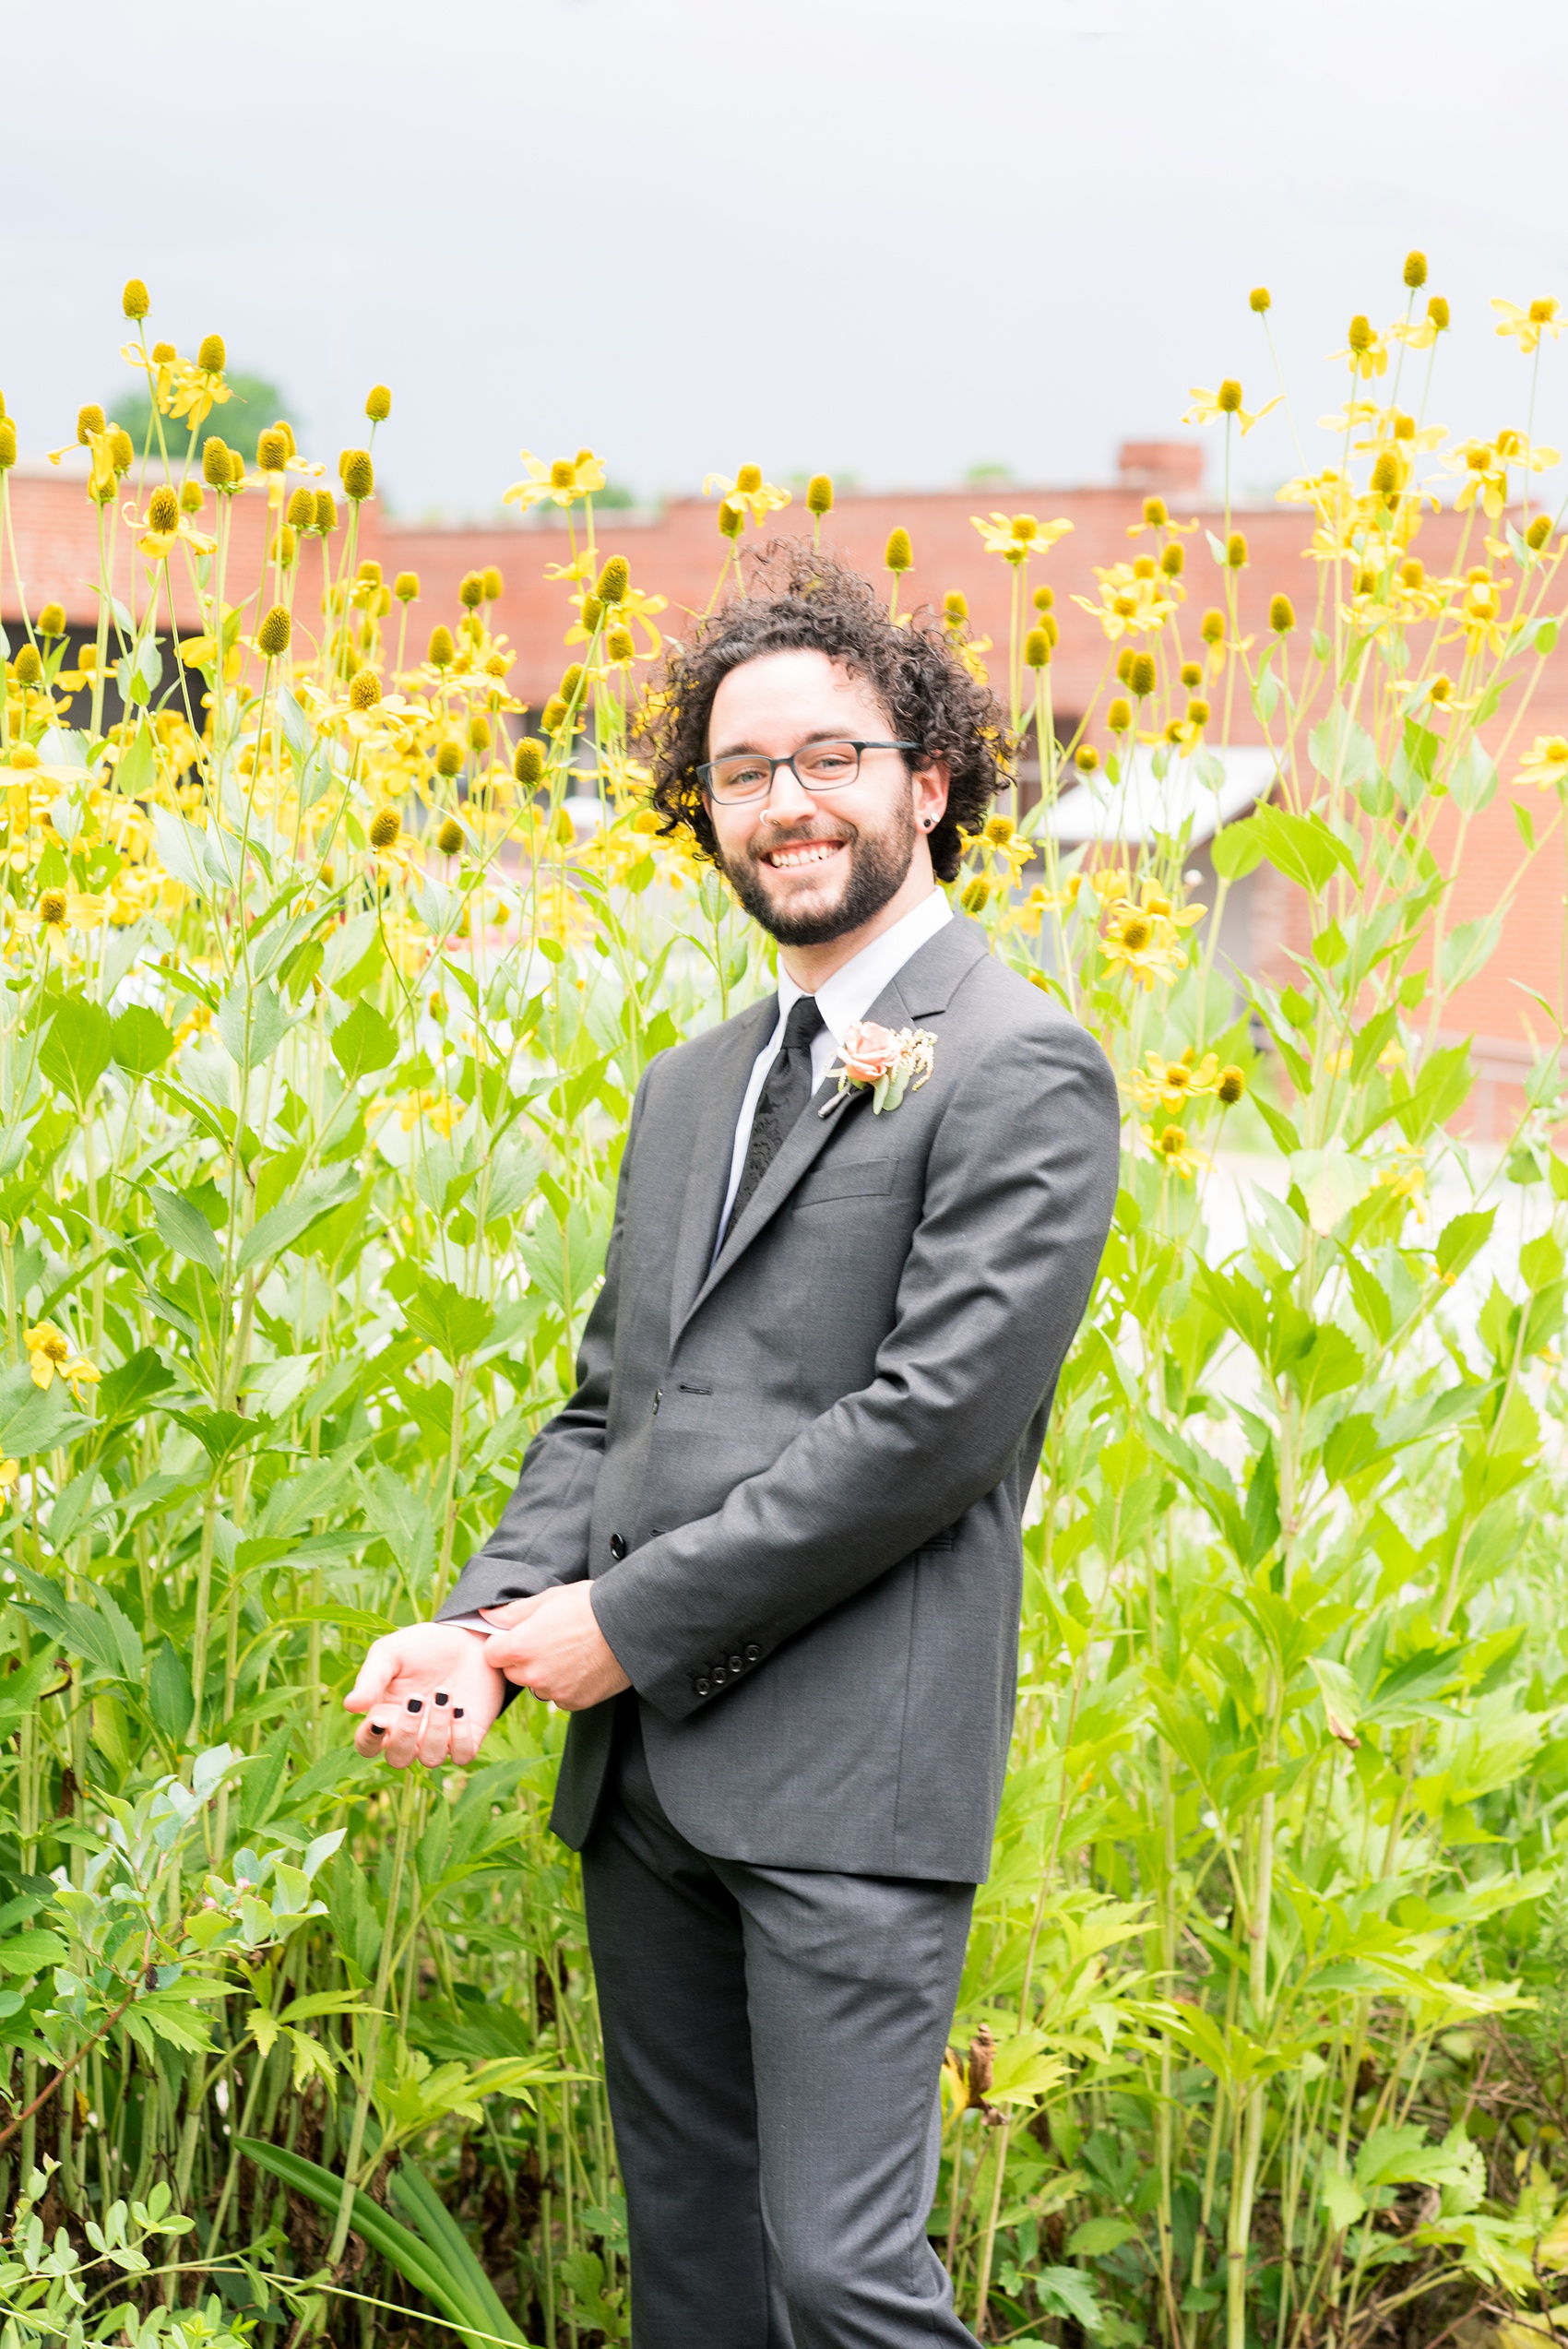 Mikkel Paige Photography photos from a wedding in Durham, North Carolina. Picture of the groom with yellow flowers behind him.